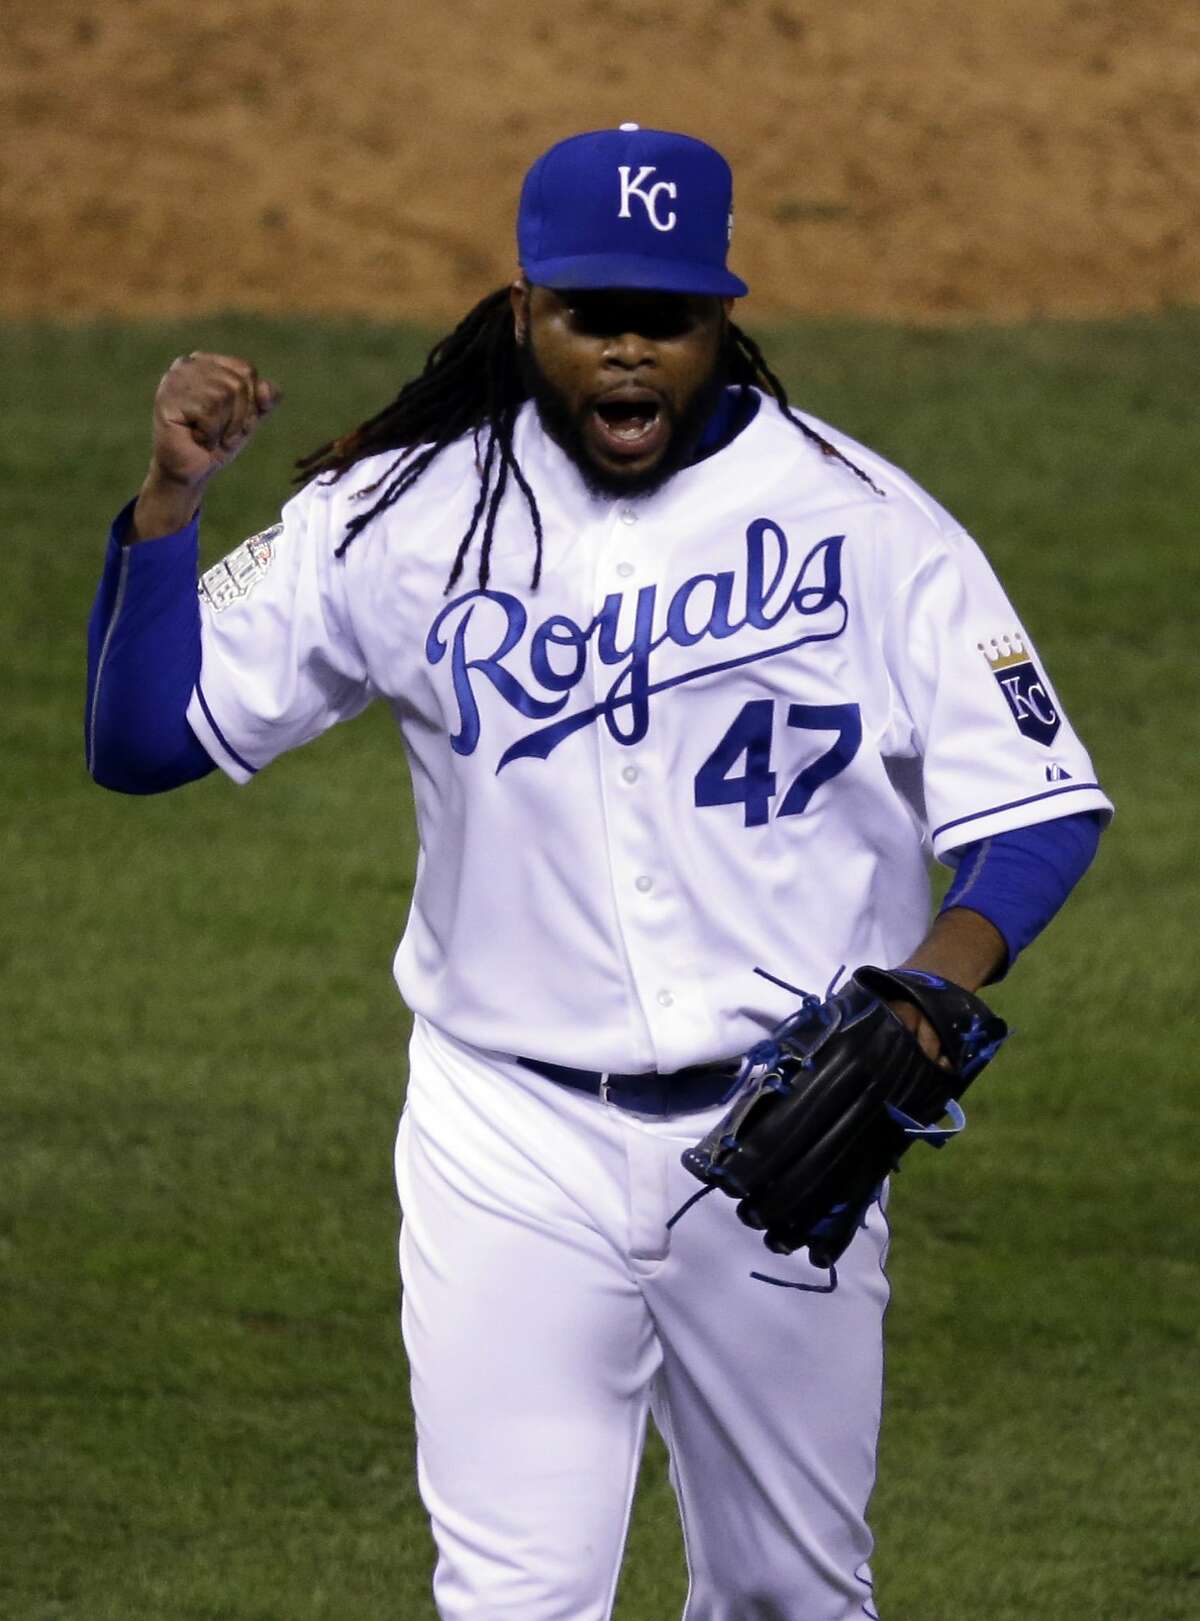 Kansas City Royals pitcher Johnny Cueto celebrates the end of the top of the eighth inning of Game 2 of the Major League Baseball World Series against the New York Mets Wednesday, Oct. 28, 2015, in Kansas City.